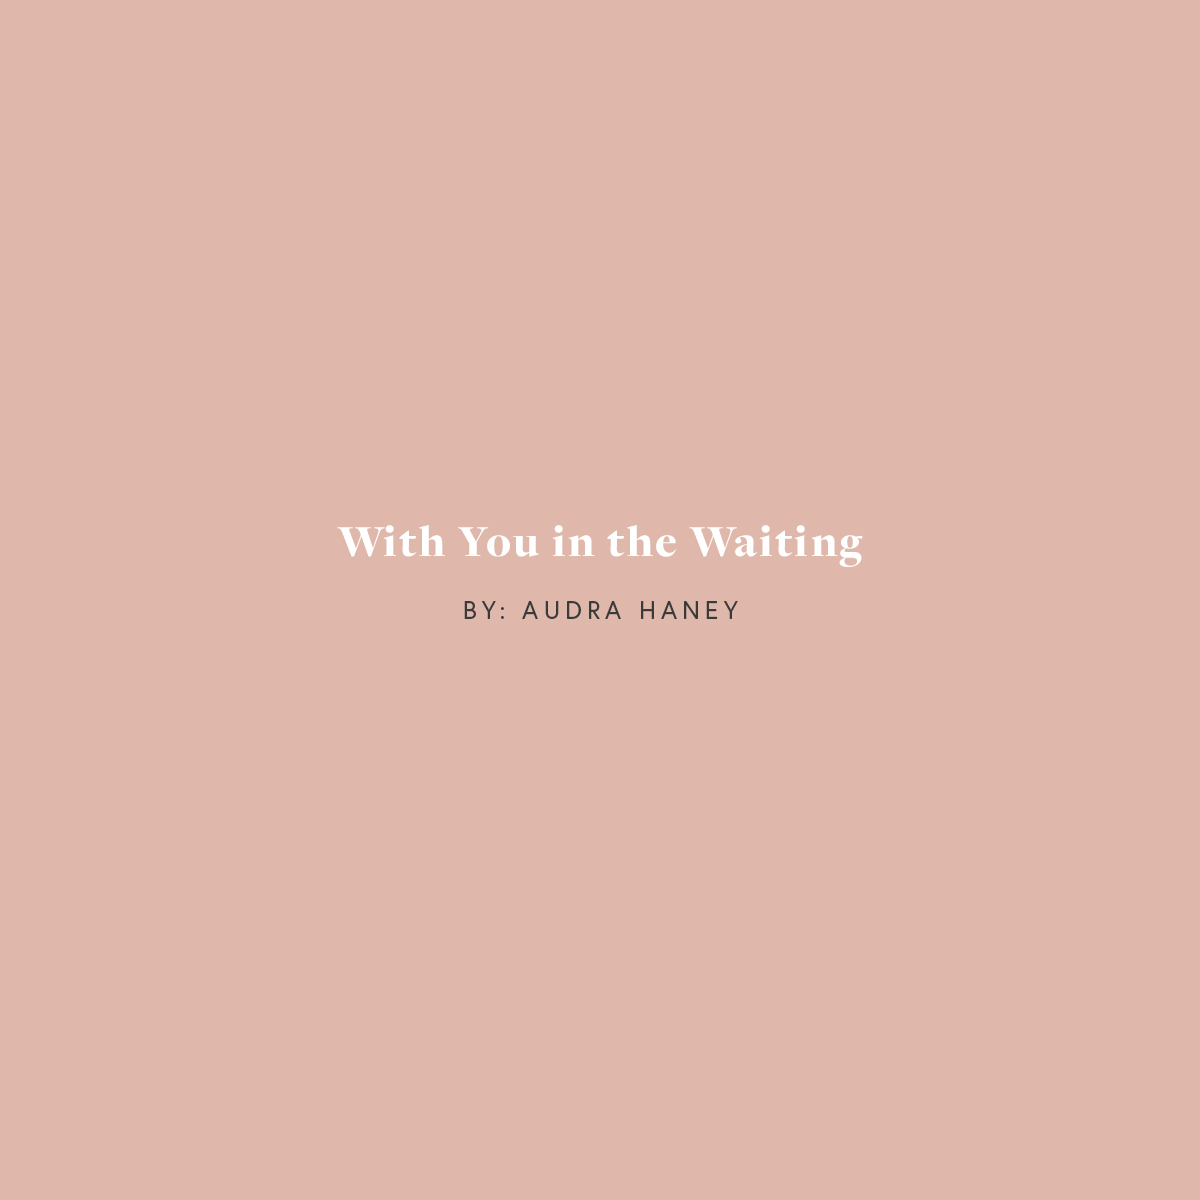 With You in the Waiting: By Audra Haney